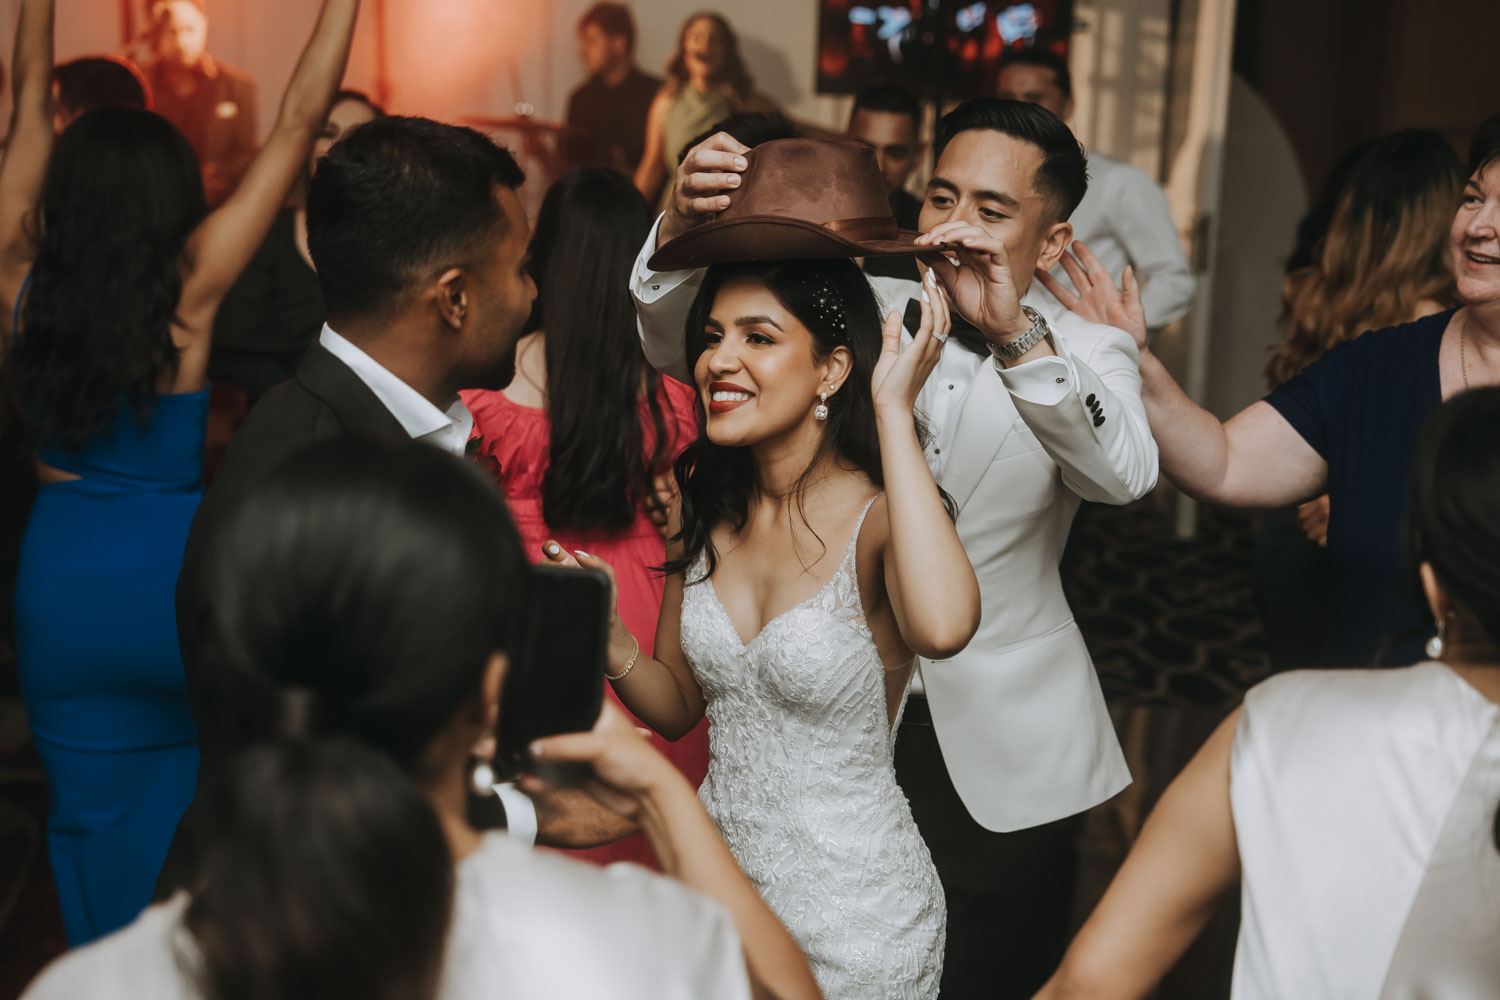 A Melbourne wedding photographer captures a joyous moment as the bride, donned in an exquisite lace gown, gleefully tries on a hat handed to her by a smiling guest. The groom, in a sharp white suit, looks on with affection amidst the bustling crowd of elegantly dressed guests, all immersed in celebration.